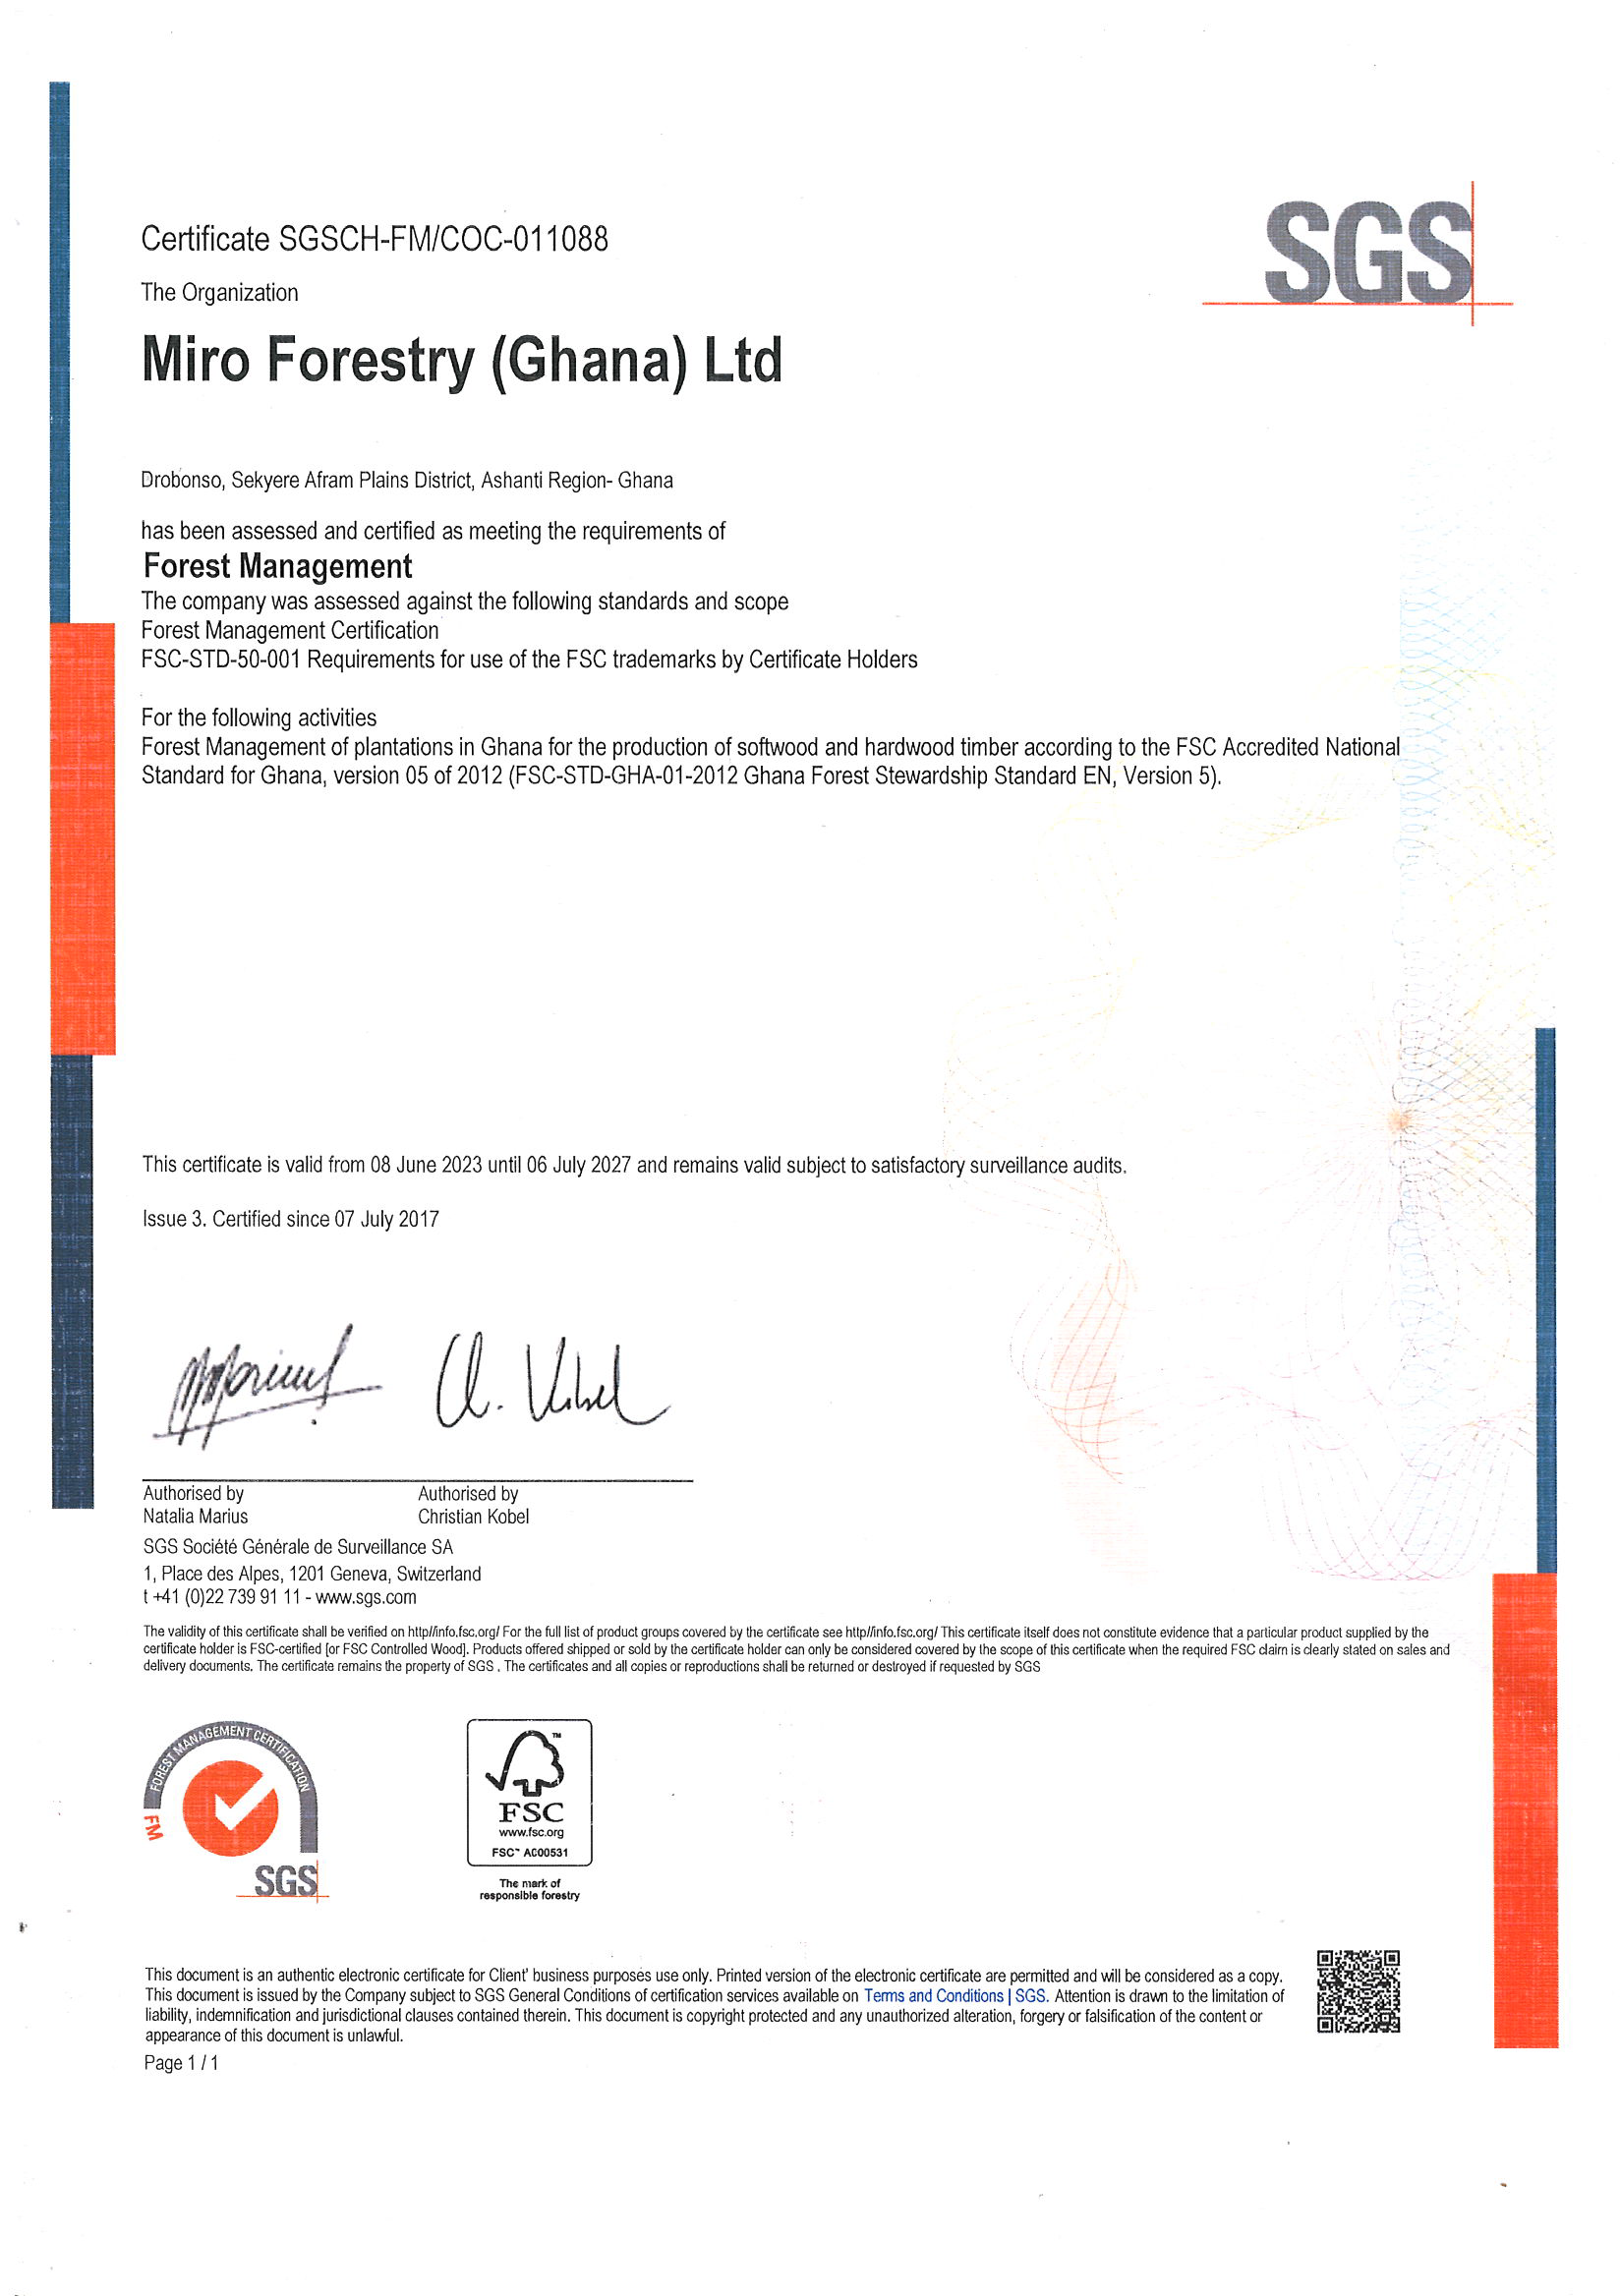 MFGH Forest Management Certificate copy